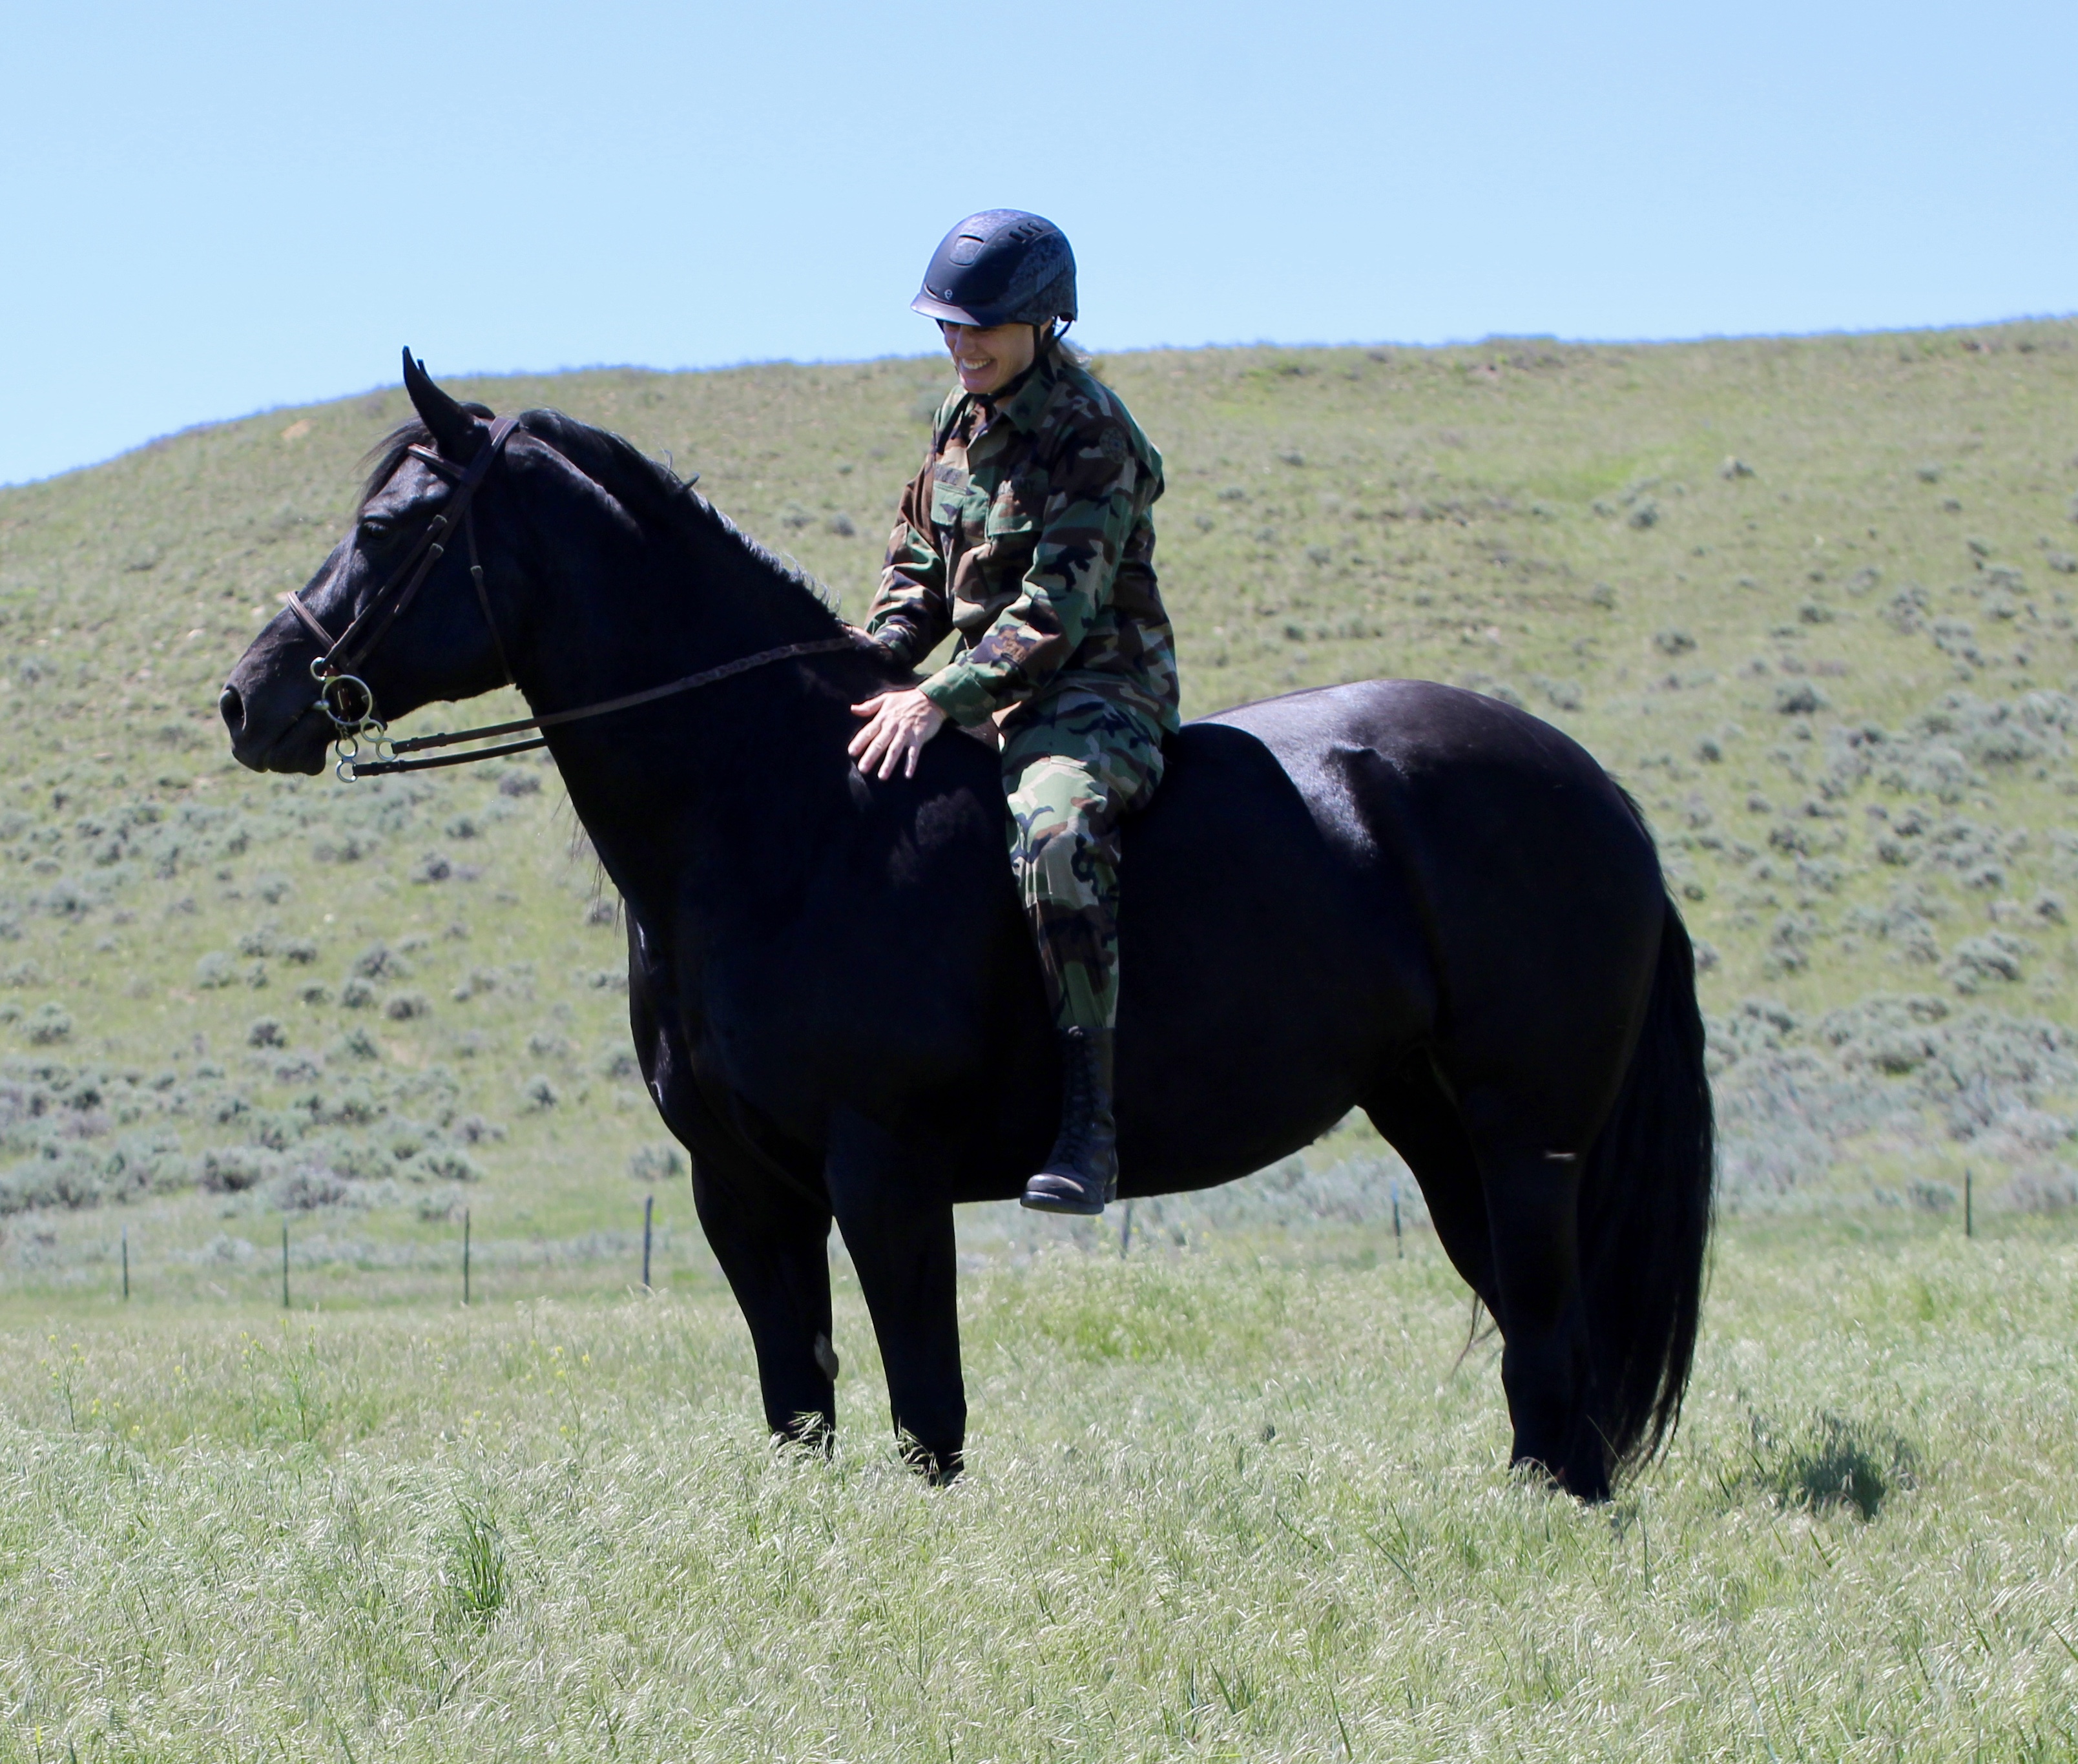 Save the Date – Horses Spirits Healing Veteran and Donor Appreciation Day September 14th, 2019